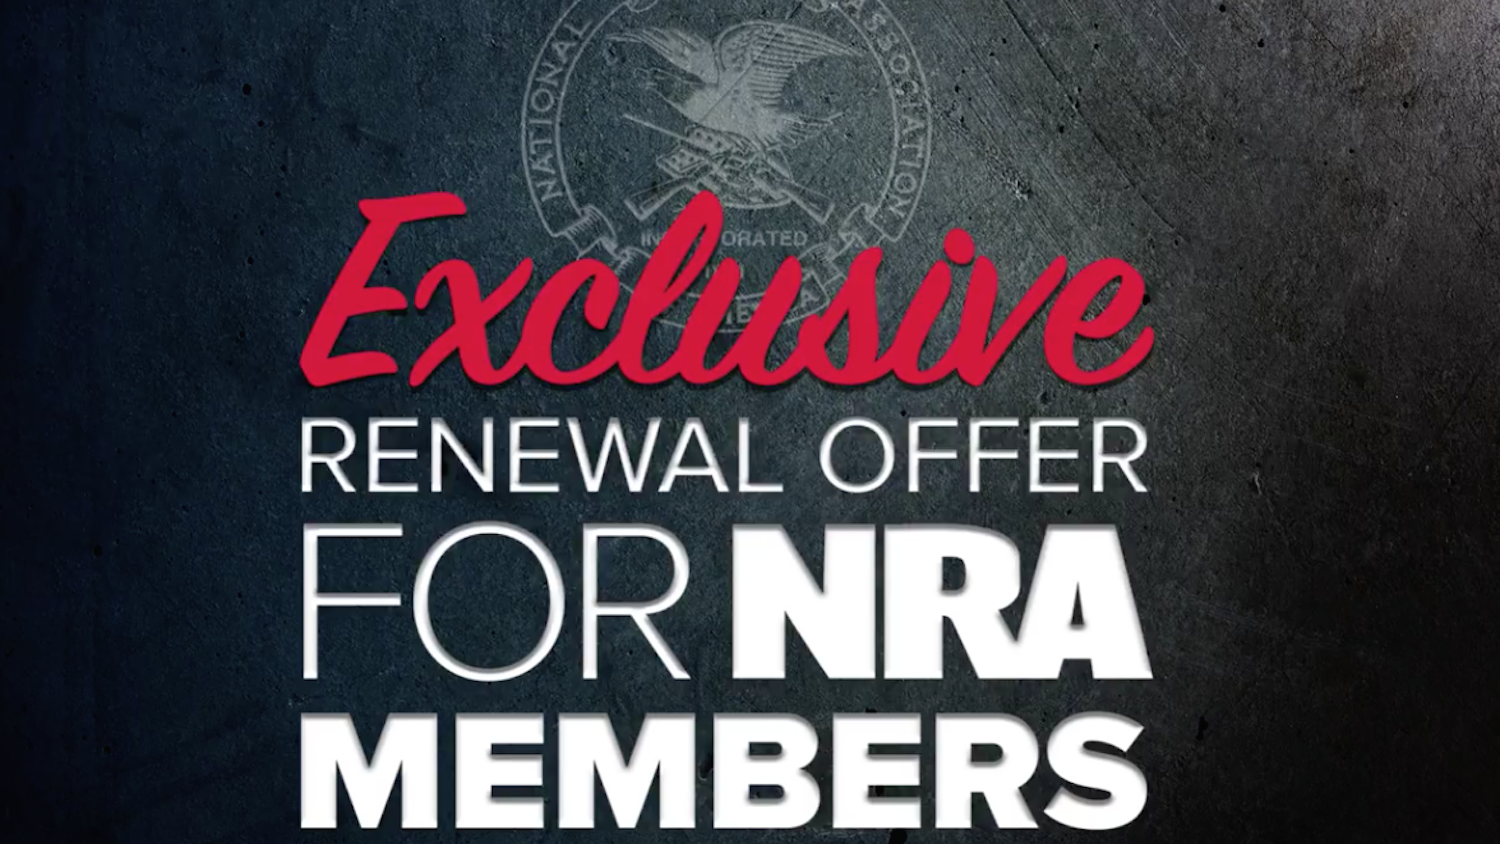 Stand and Fight! Exclusive Renewal Offer For NRA Members